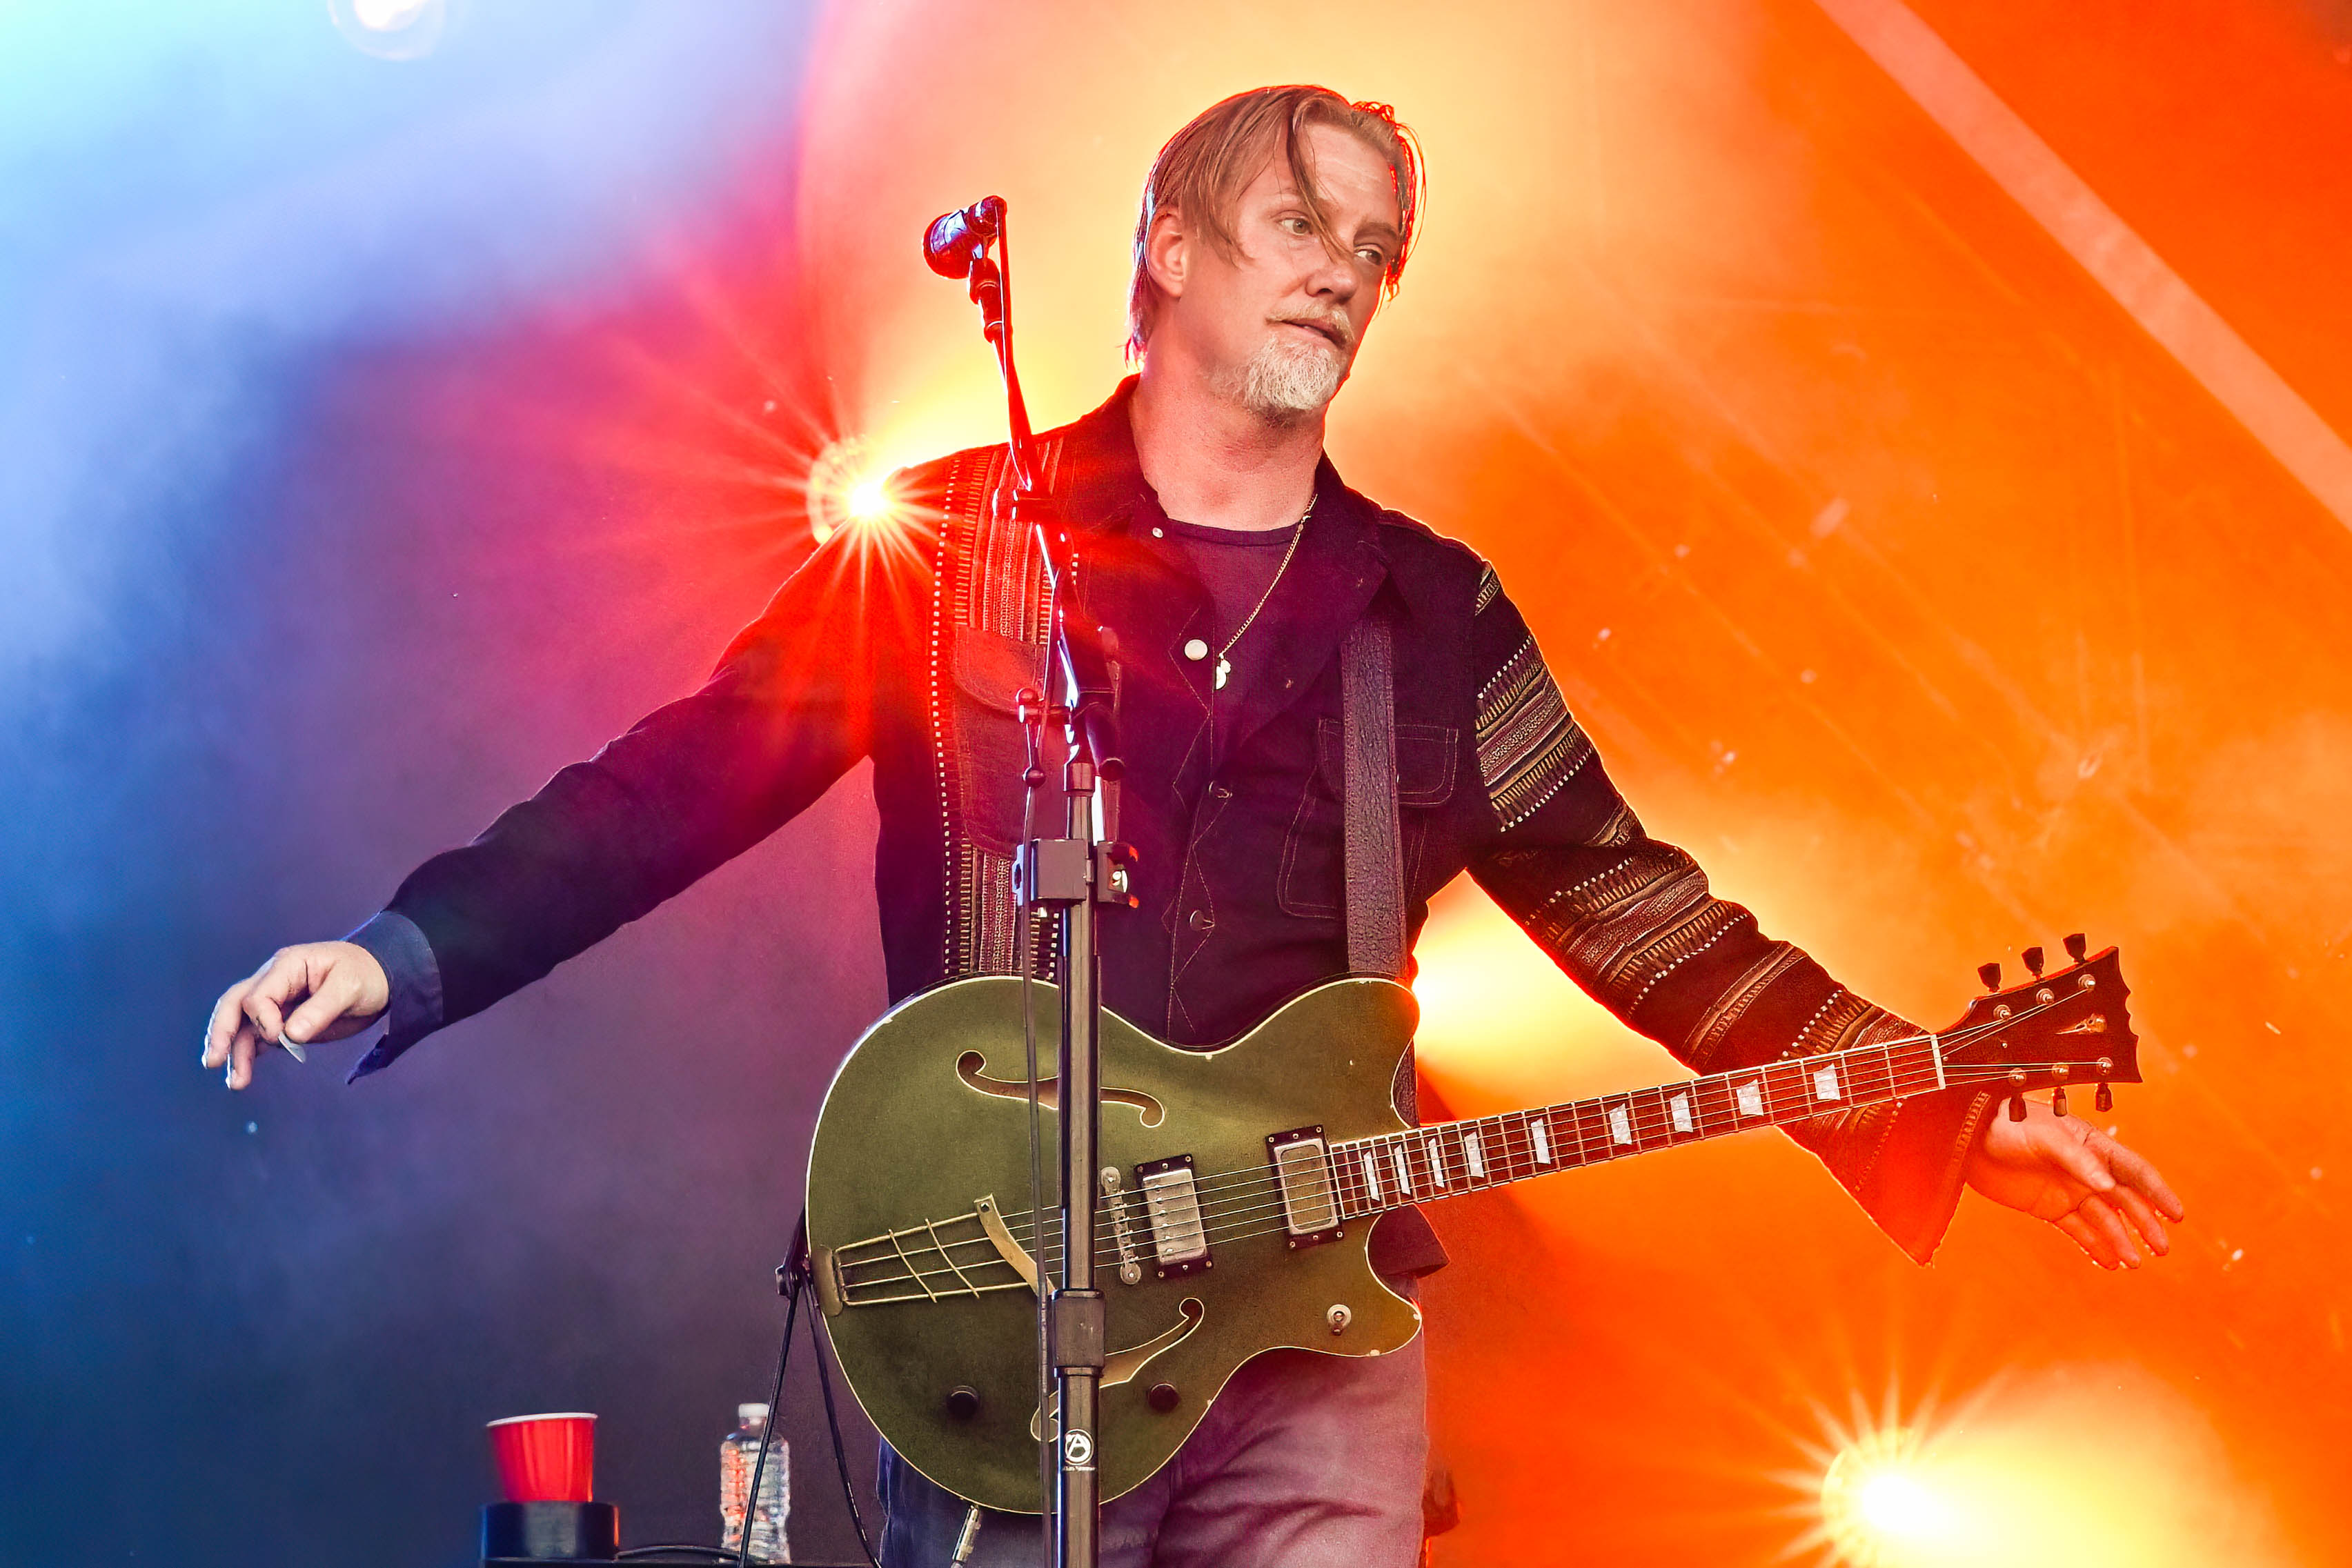 Queens Of The Stone Age are also a headline act